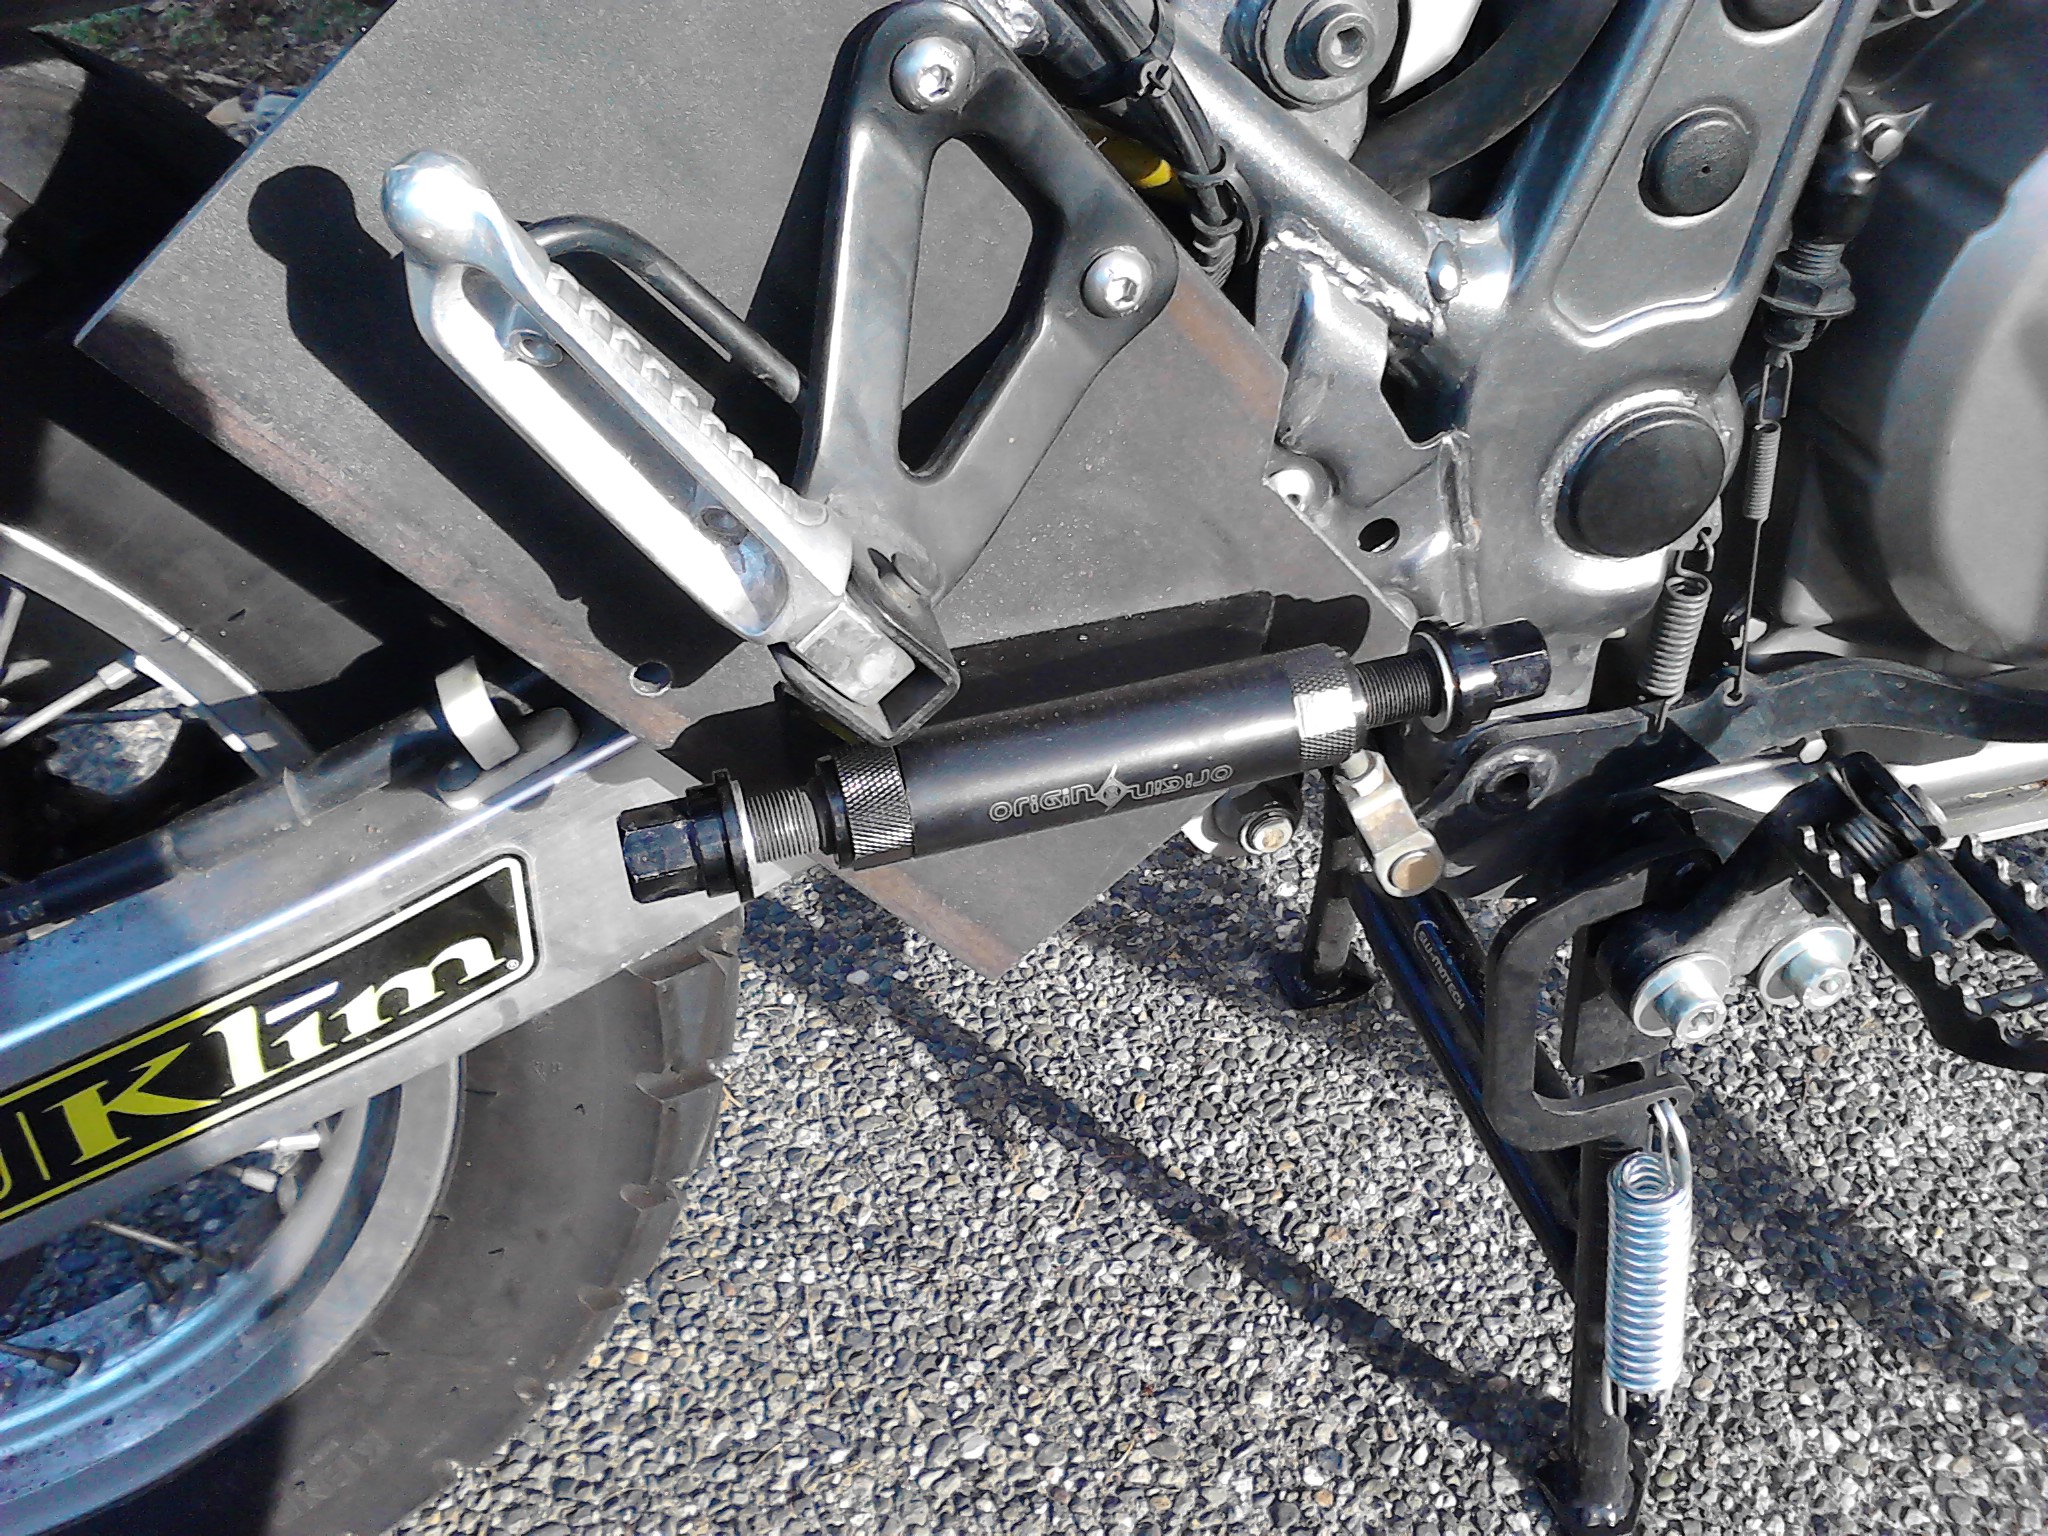 Fork Mount installed, with axle in place